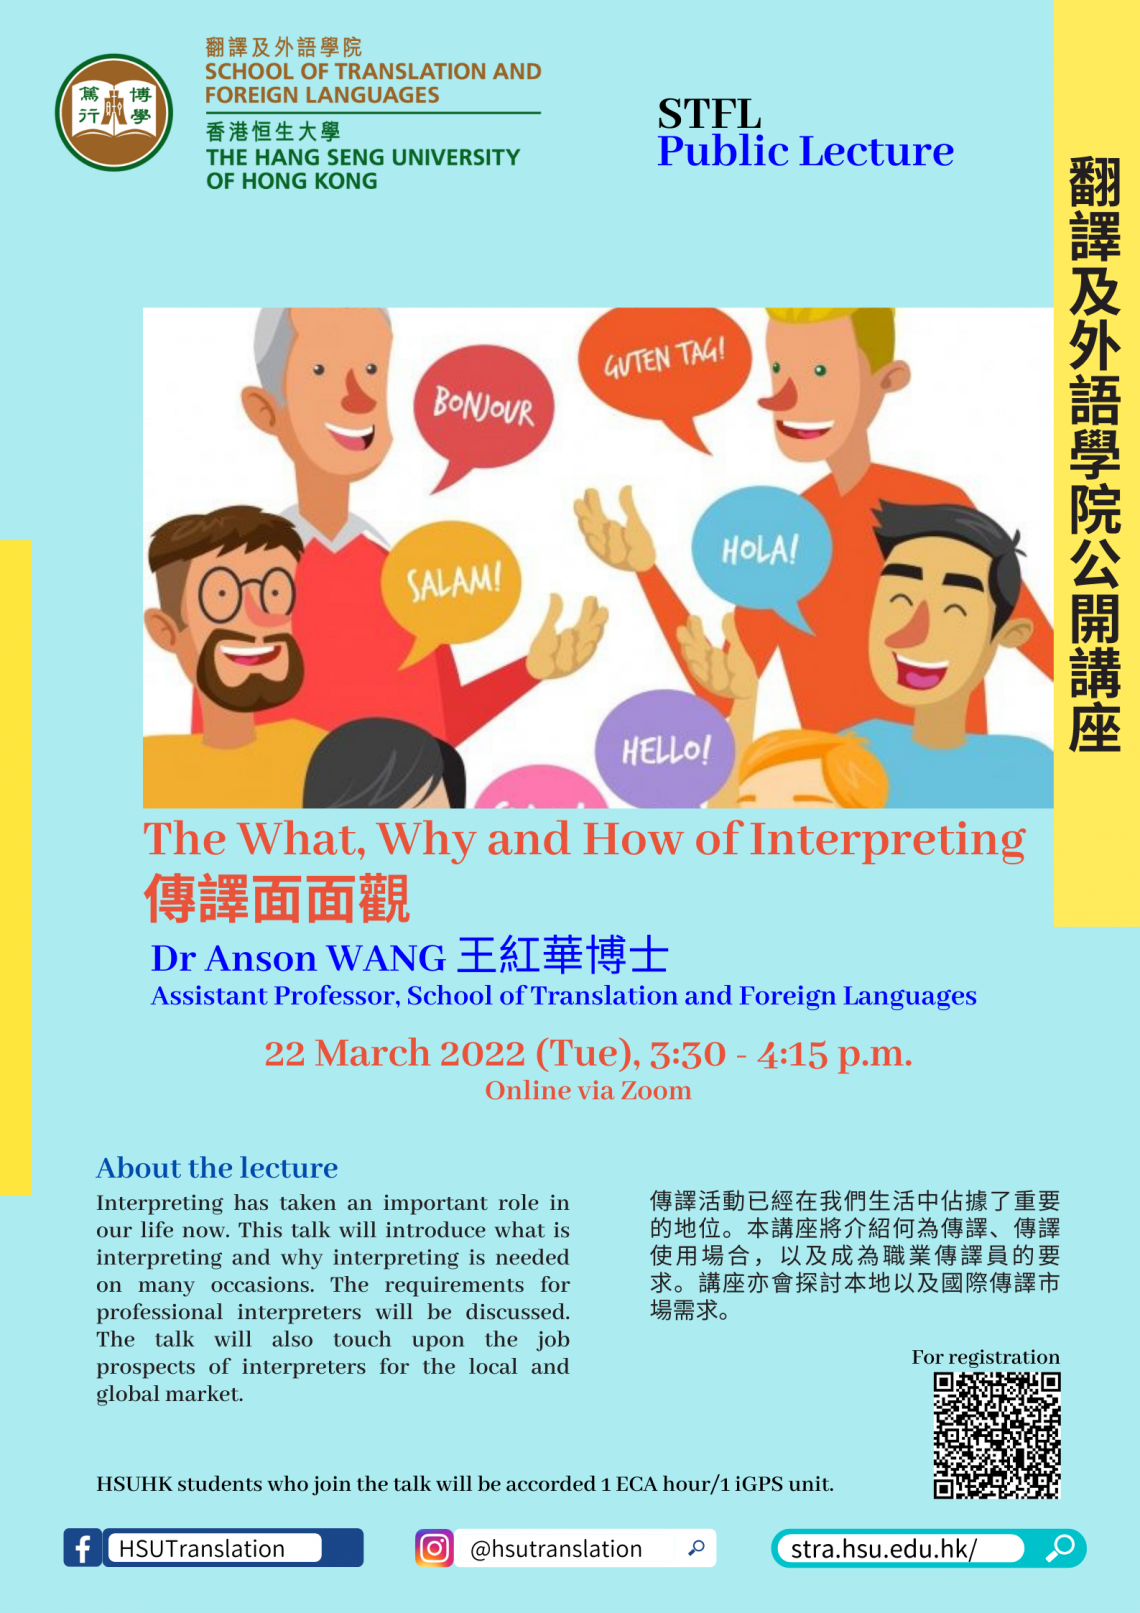 [STFL Public Lecture] The What, Why and How of Interpreting 傳譯面面觀